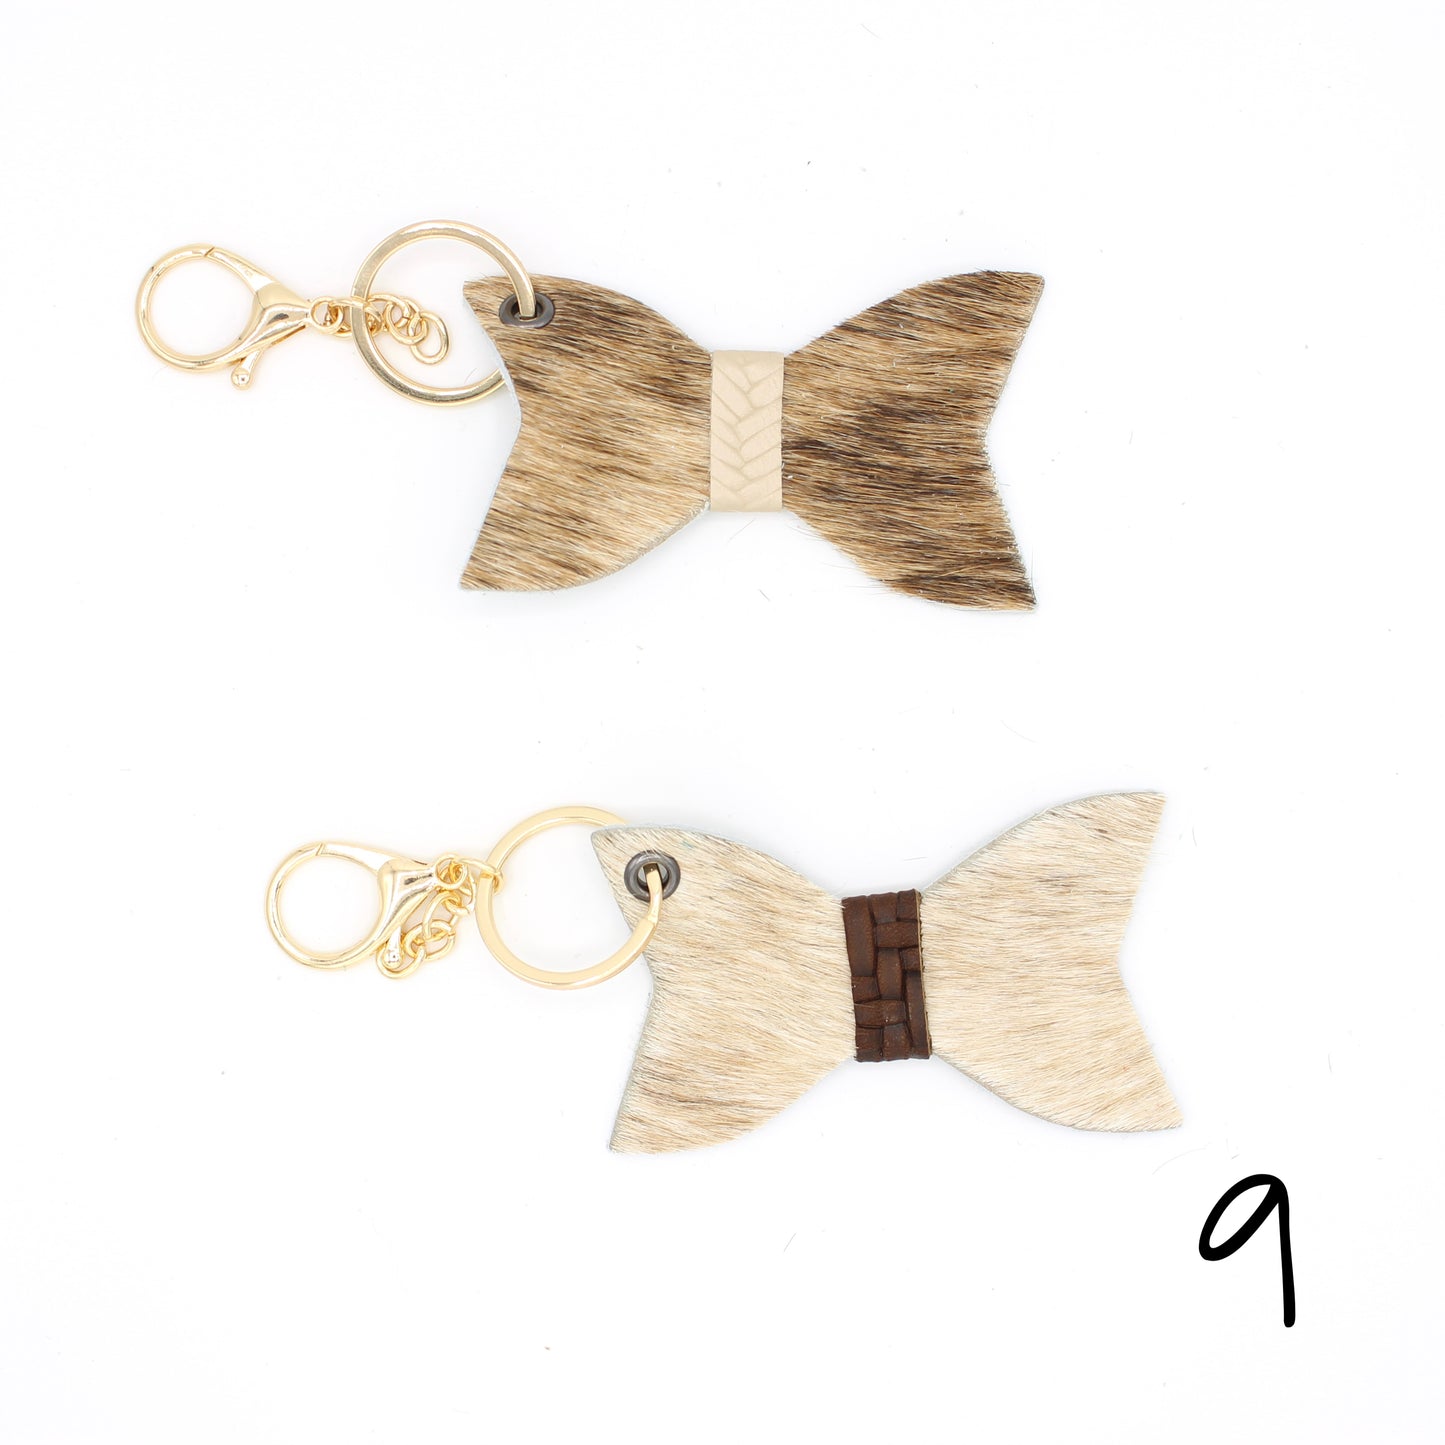 Hair Hide Belted Keychain - 2 PACK